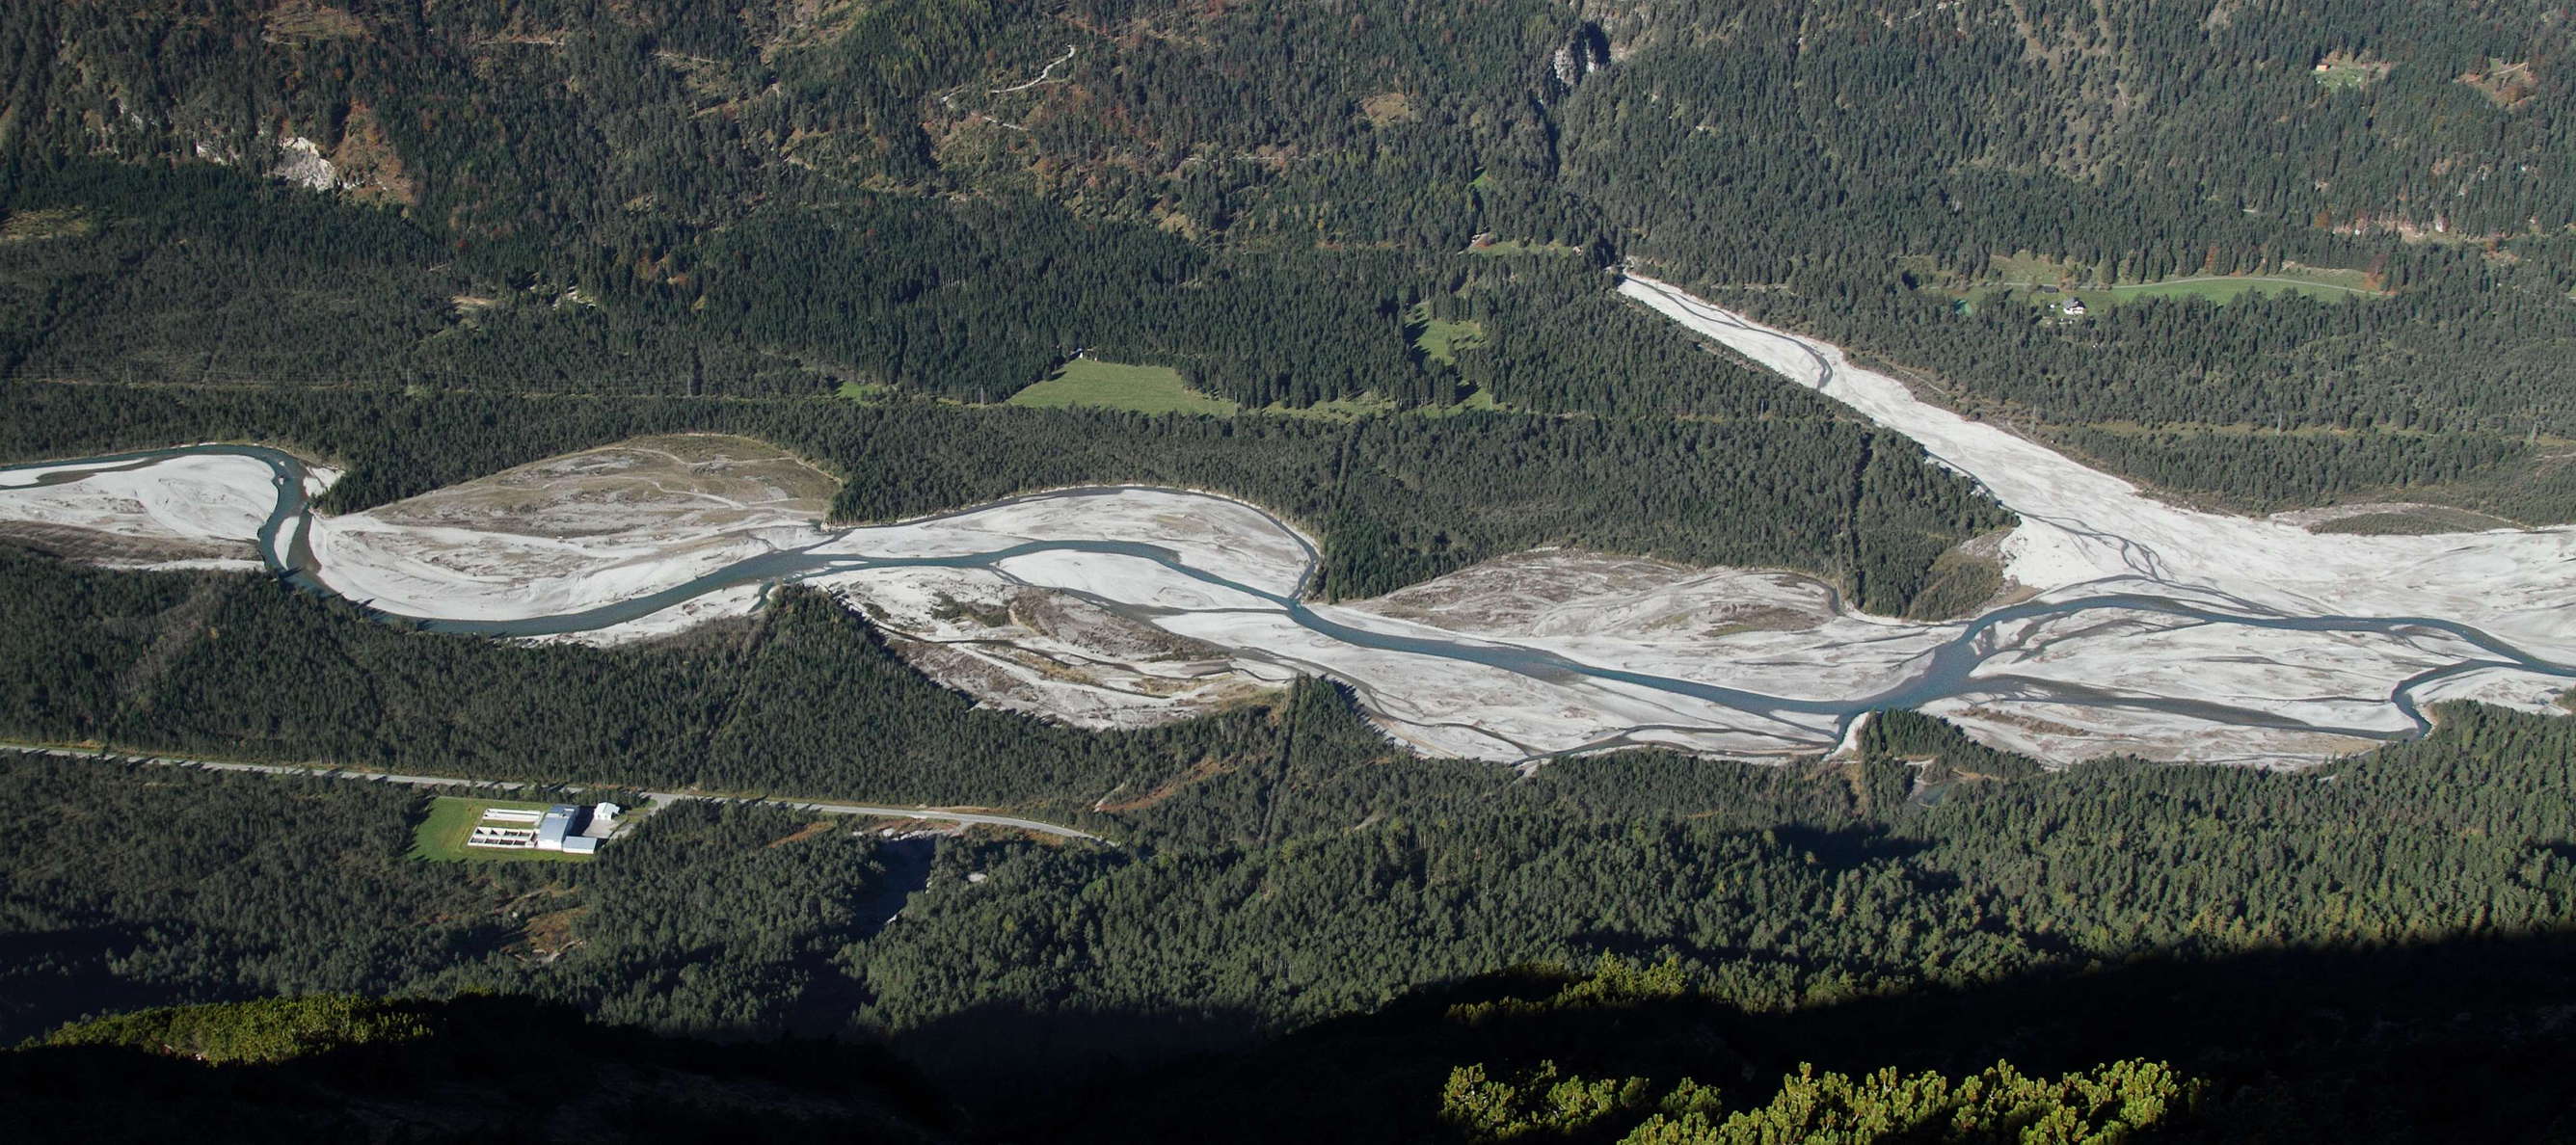 Lechtal Valley | Braided river